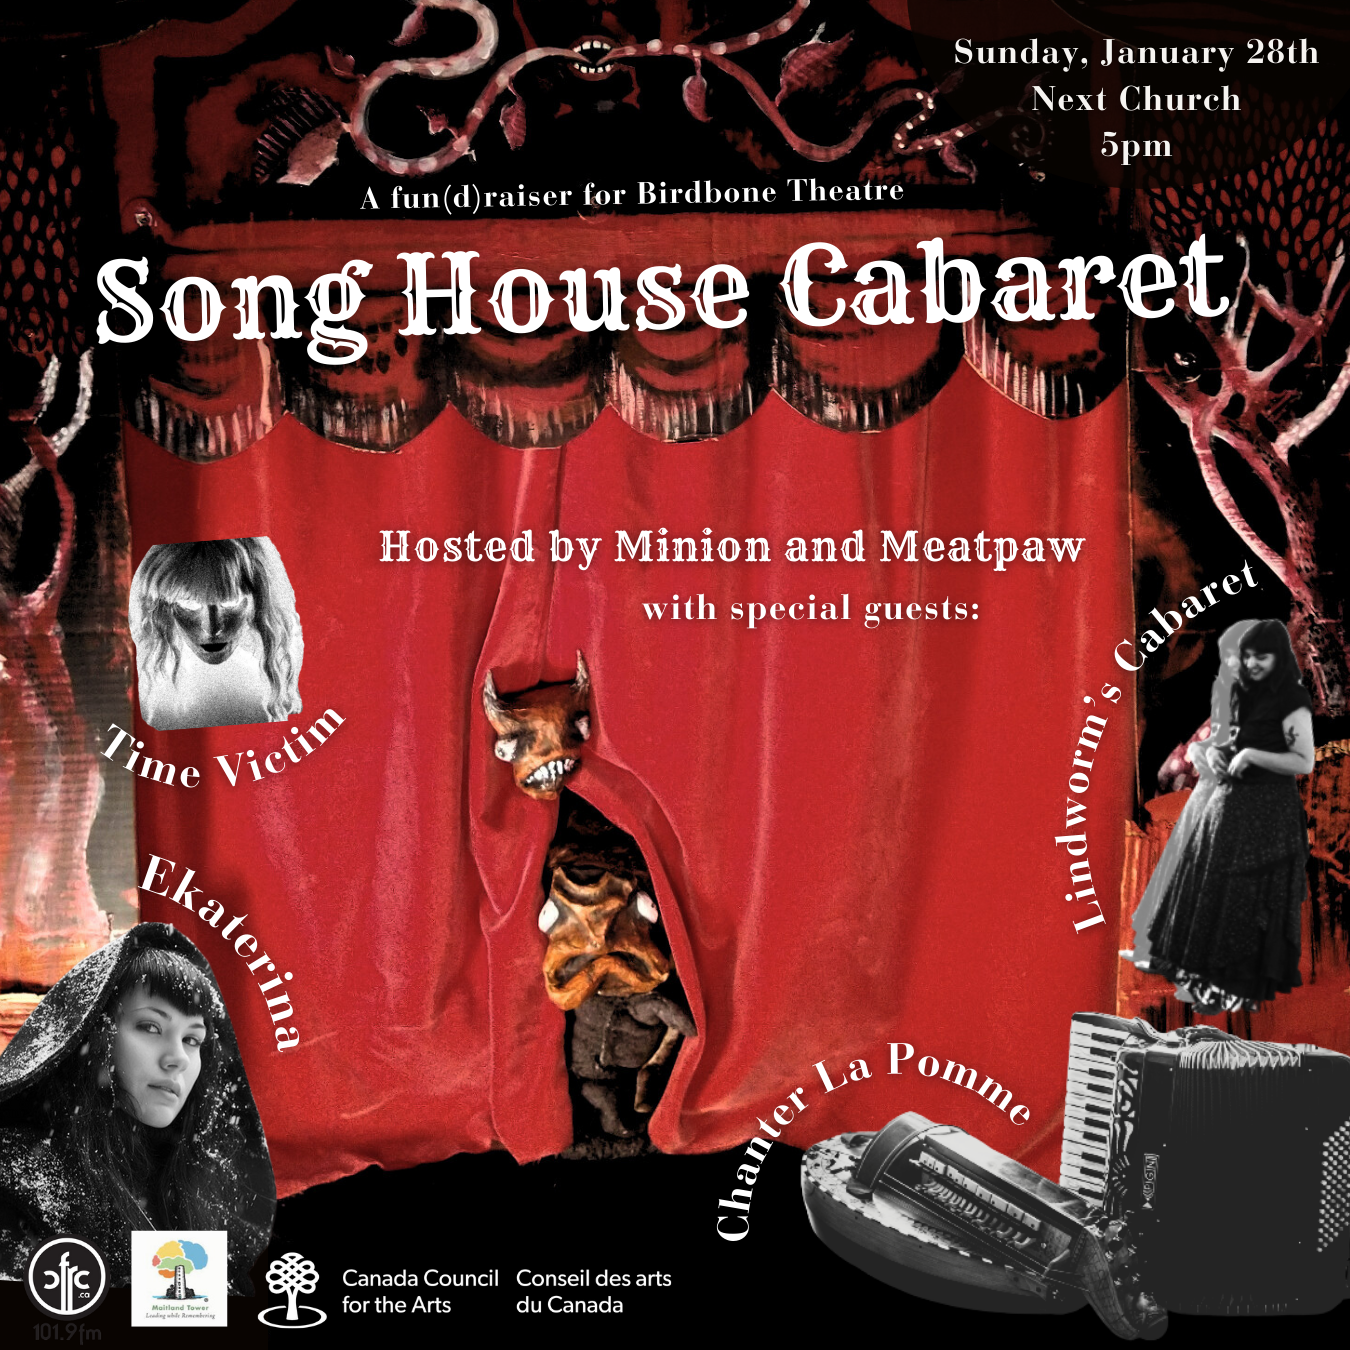 Poster for Birdbone Theatre's 'Song House Cabaret'.The title of production, date, location, hosts, and special guests are noted.